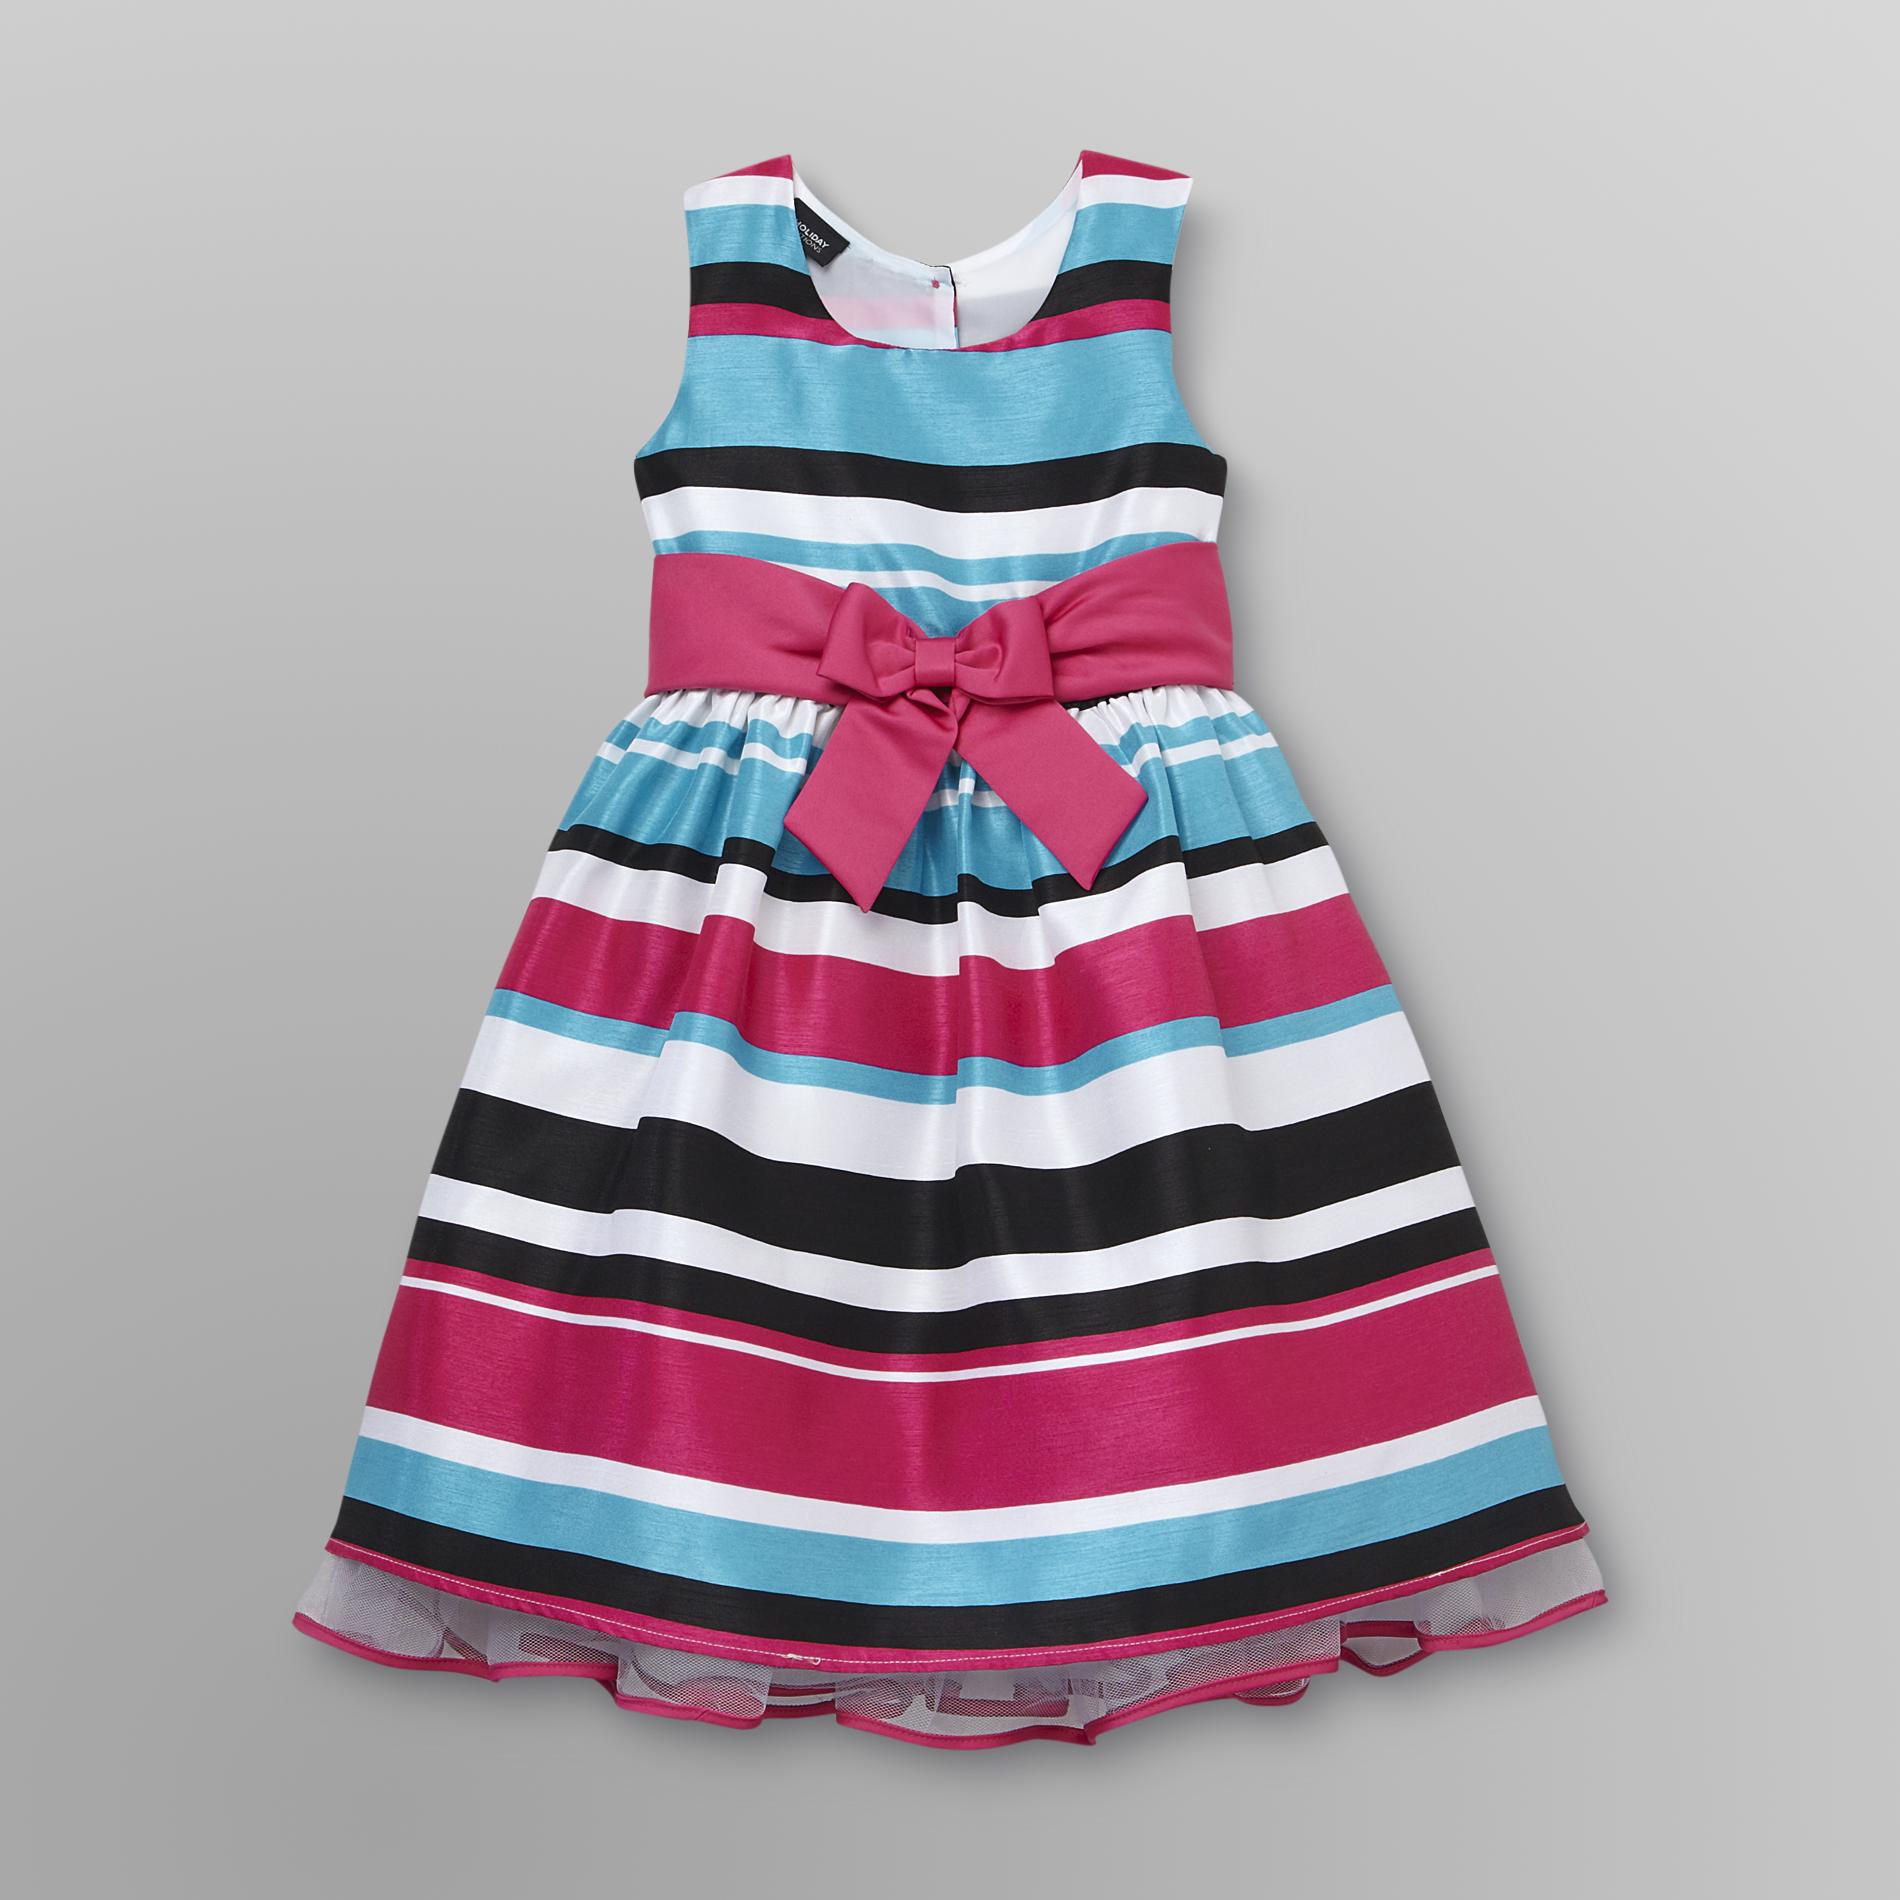 Holiday Editions Girl's Party Dress - Striped